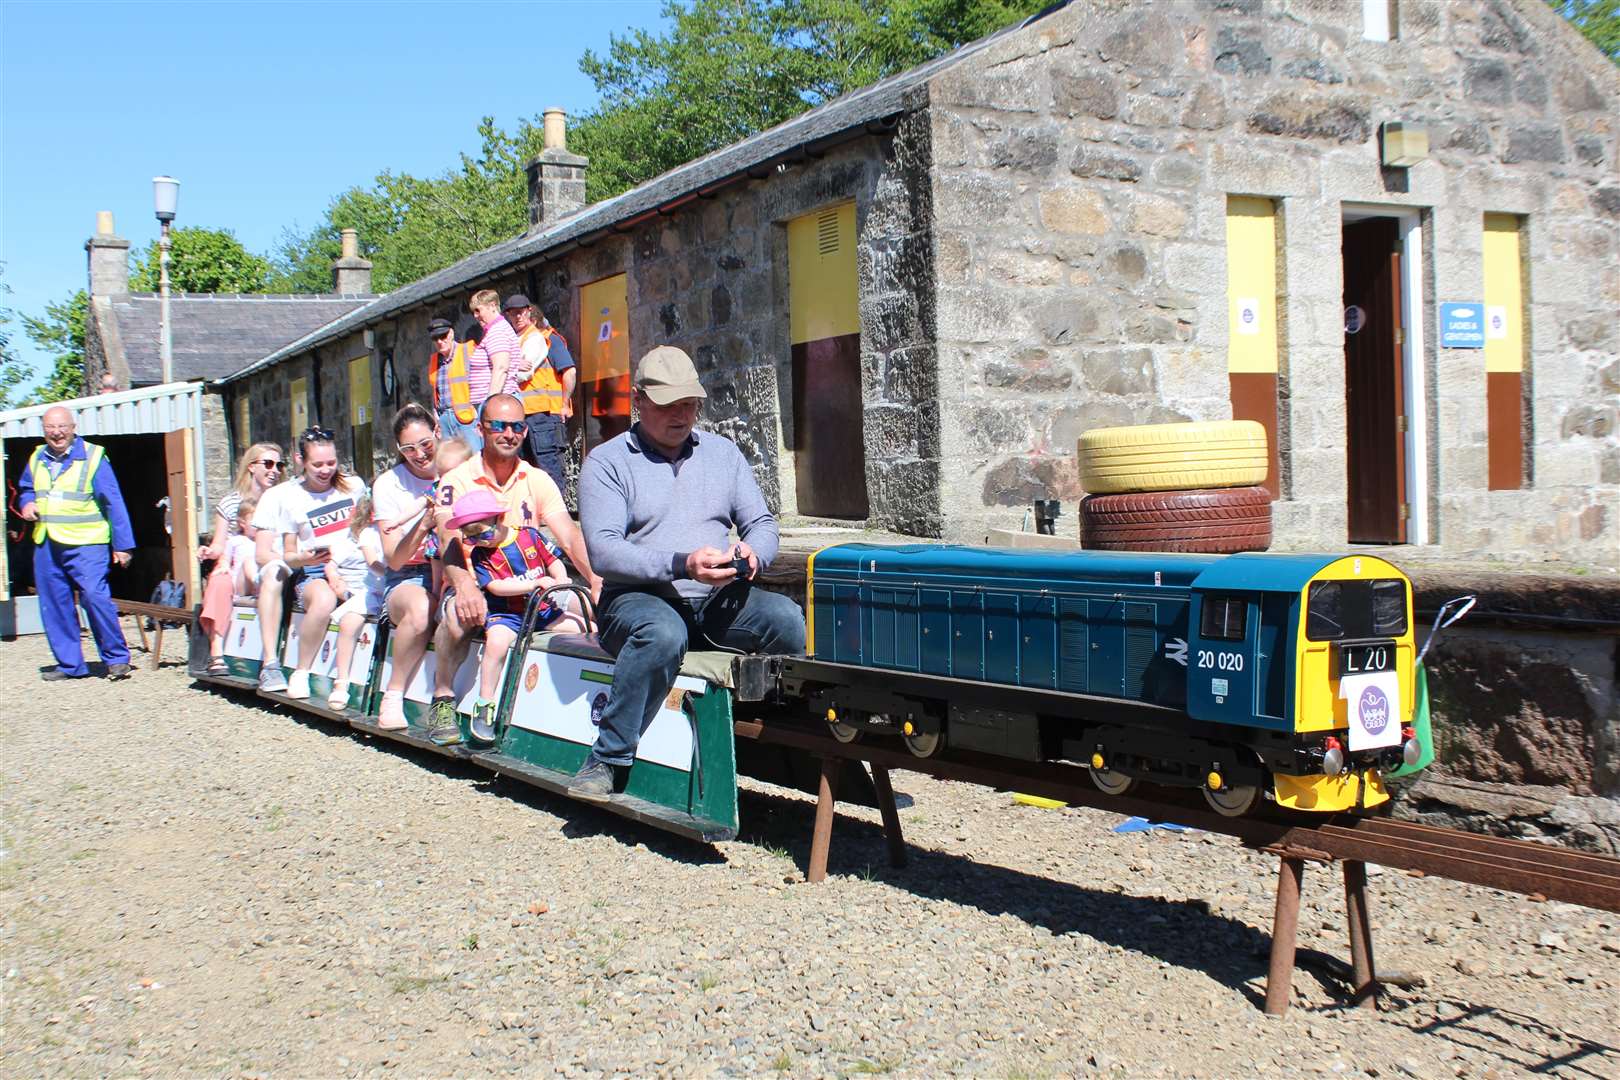 The passenger carrying miniature railway will be operational this weekend. Picture: Kyle Ritchie